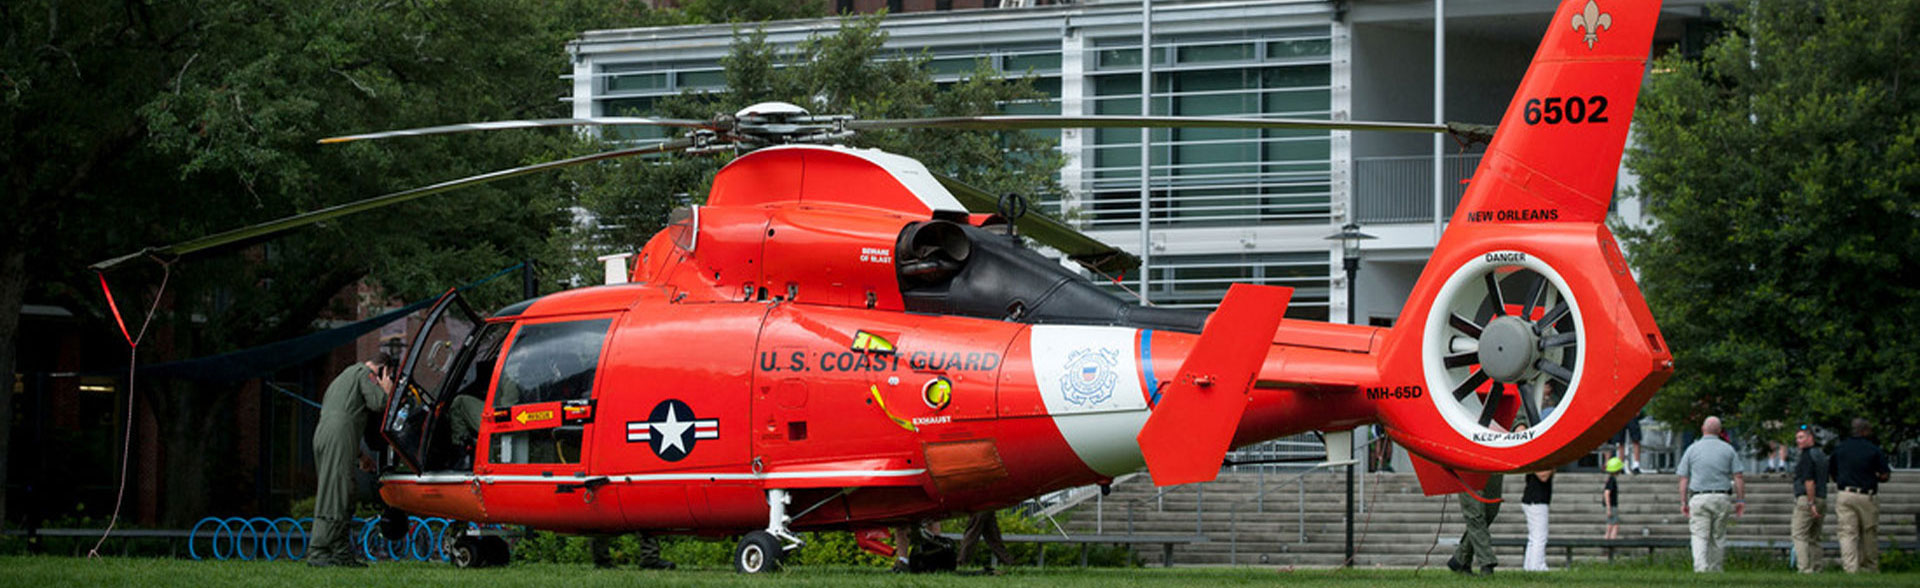 A U.S.Coast Guard helicopter lands on the LBC Quad on the uptown campus